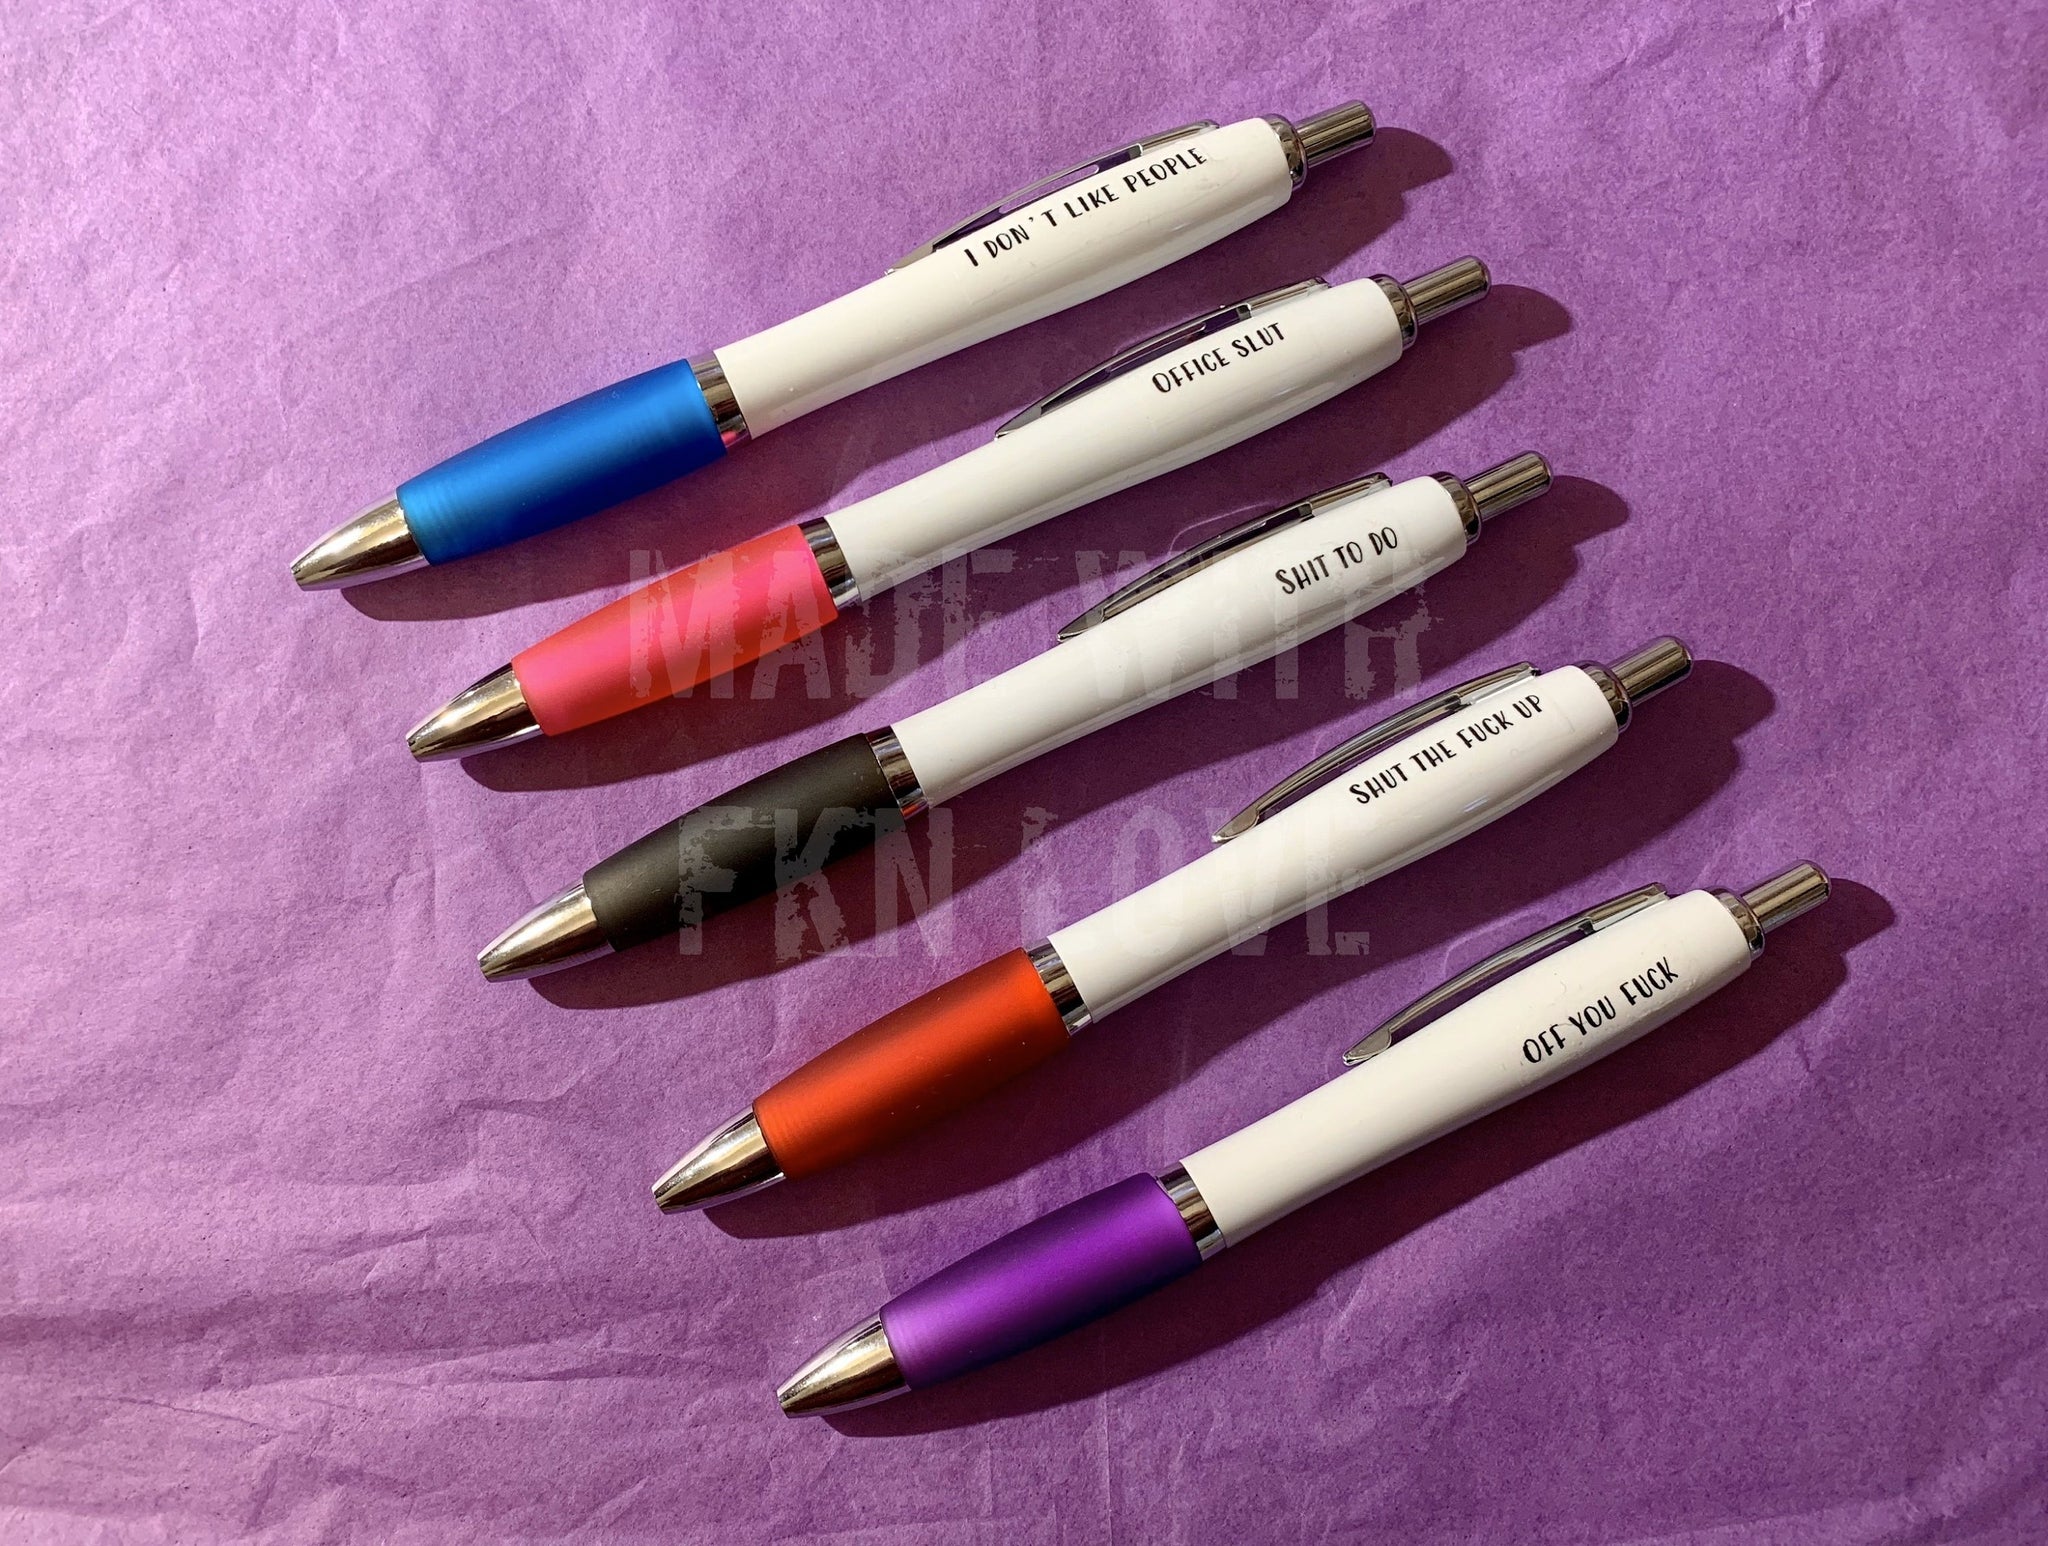 Sale Offensive pens, funny pens, rude pens, office pens, workplace pen –  MadeWithMummyLove